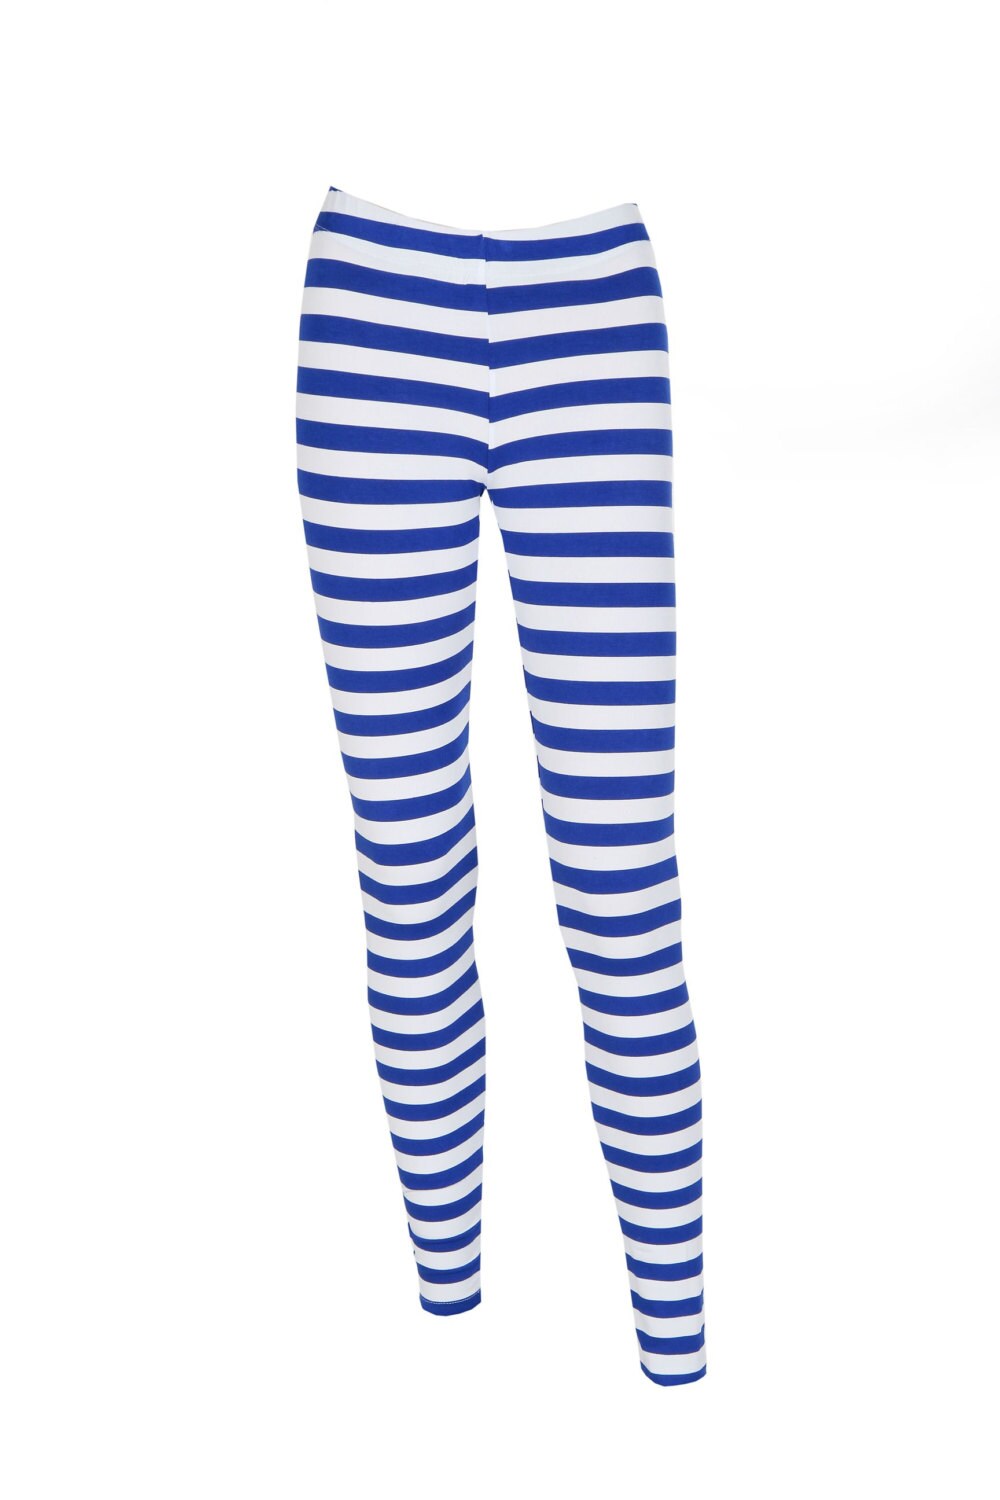 Women's leggings tights / Blue and White Striped by Dotstore